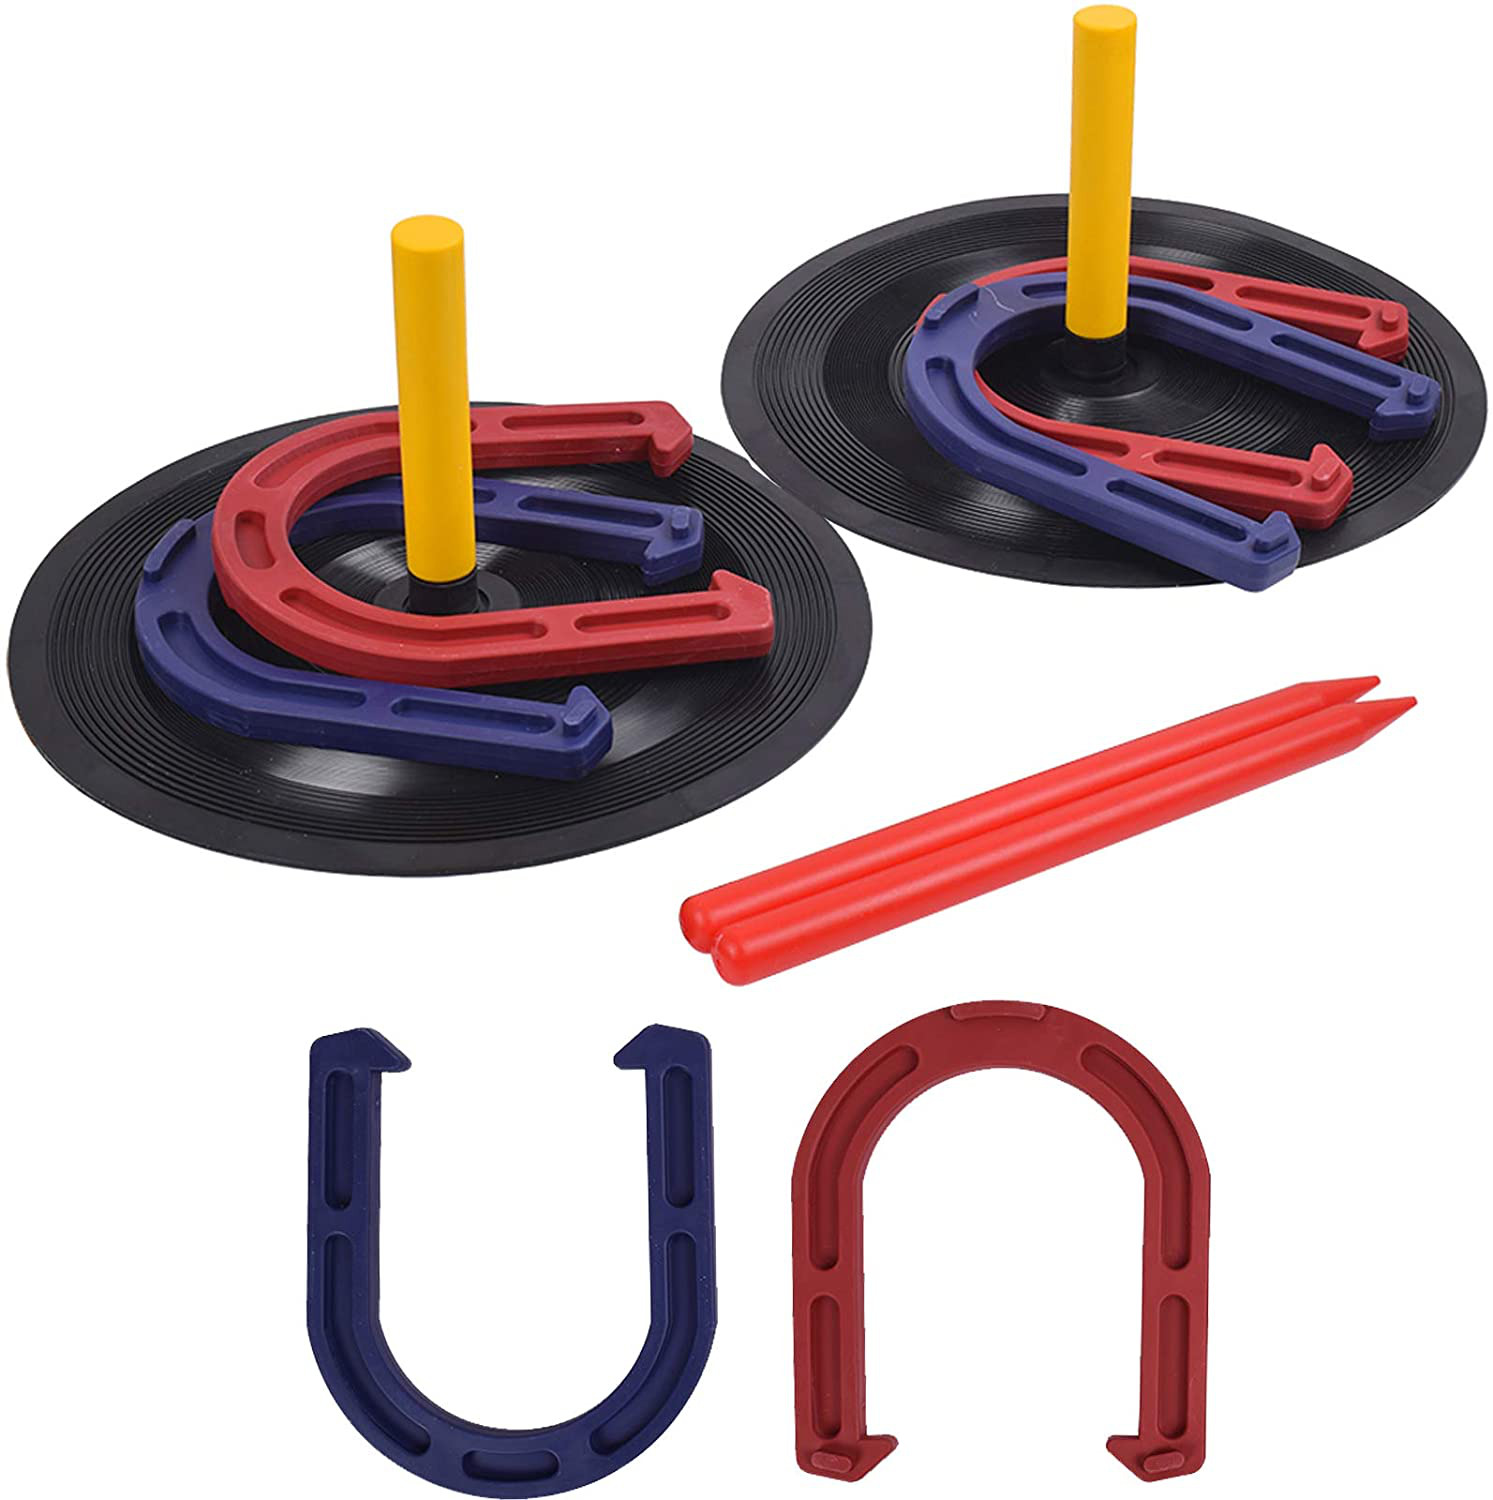 Outdoor Backyard Horse Shoes Games Set for Kids and Indoor Family Lawn Yard Out